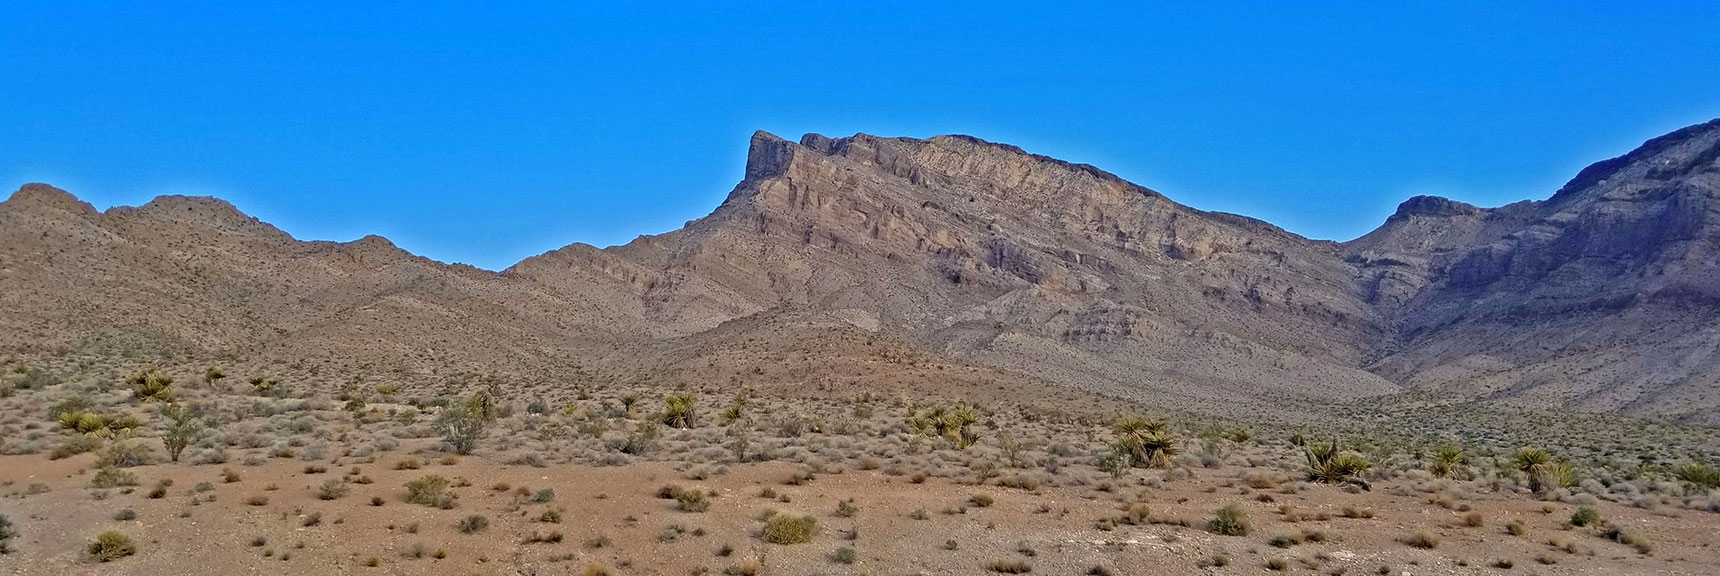 Ridge to the East of Little Red Rock Approach Canyon | Little Red Rock Las Vegas, Nevada, Near La Madre Mountains Wilderness